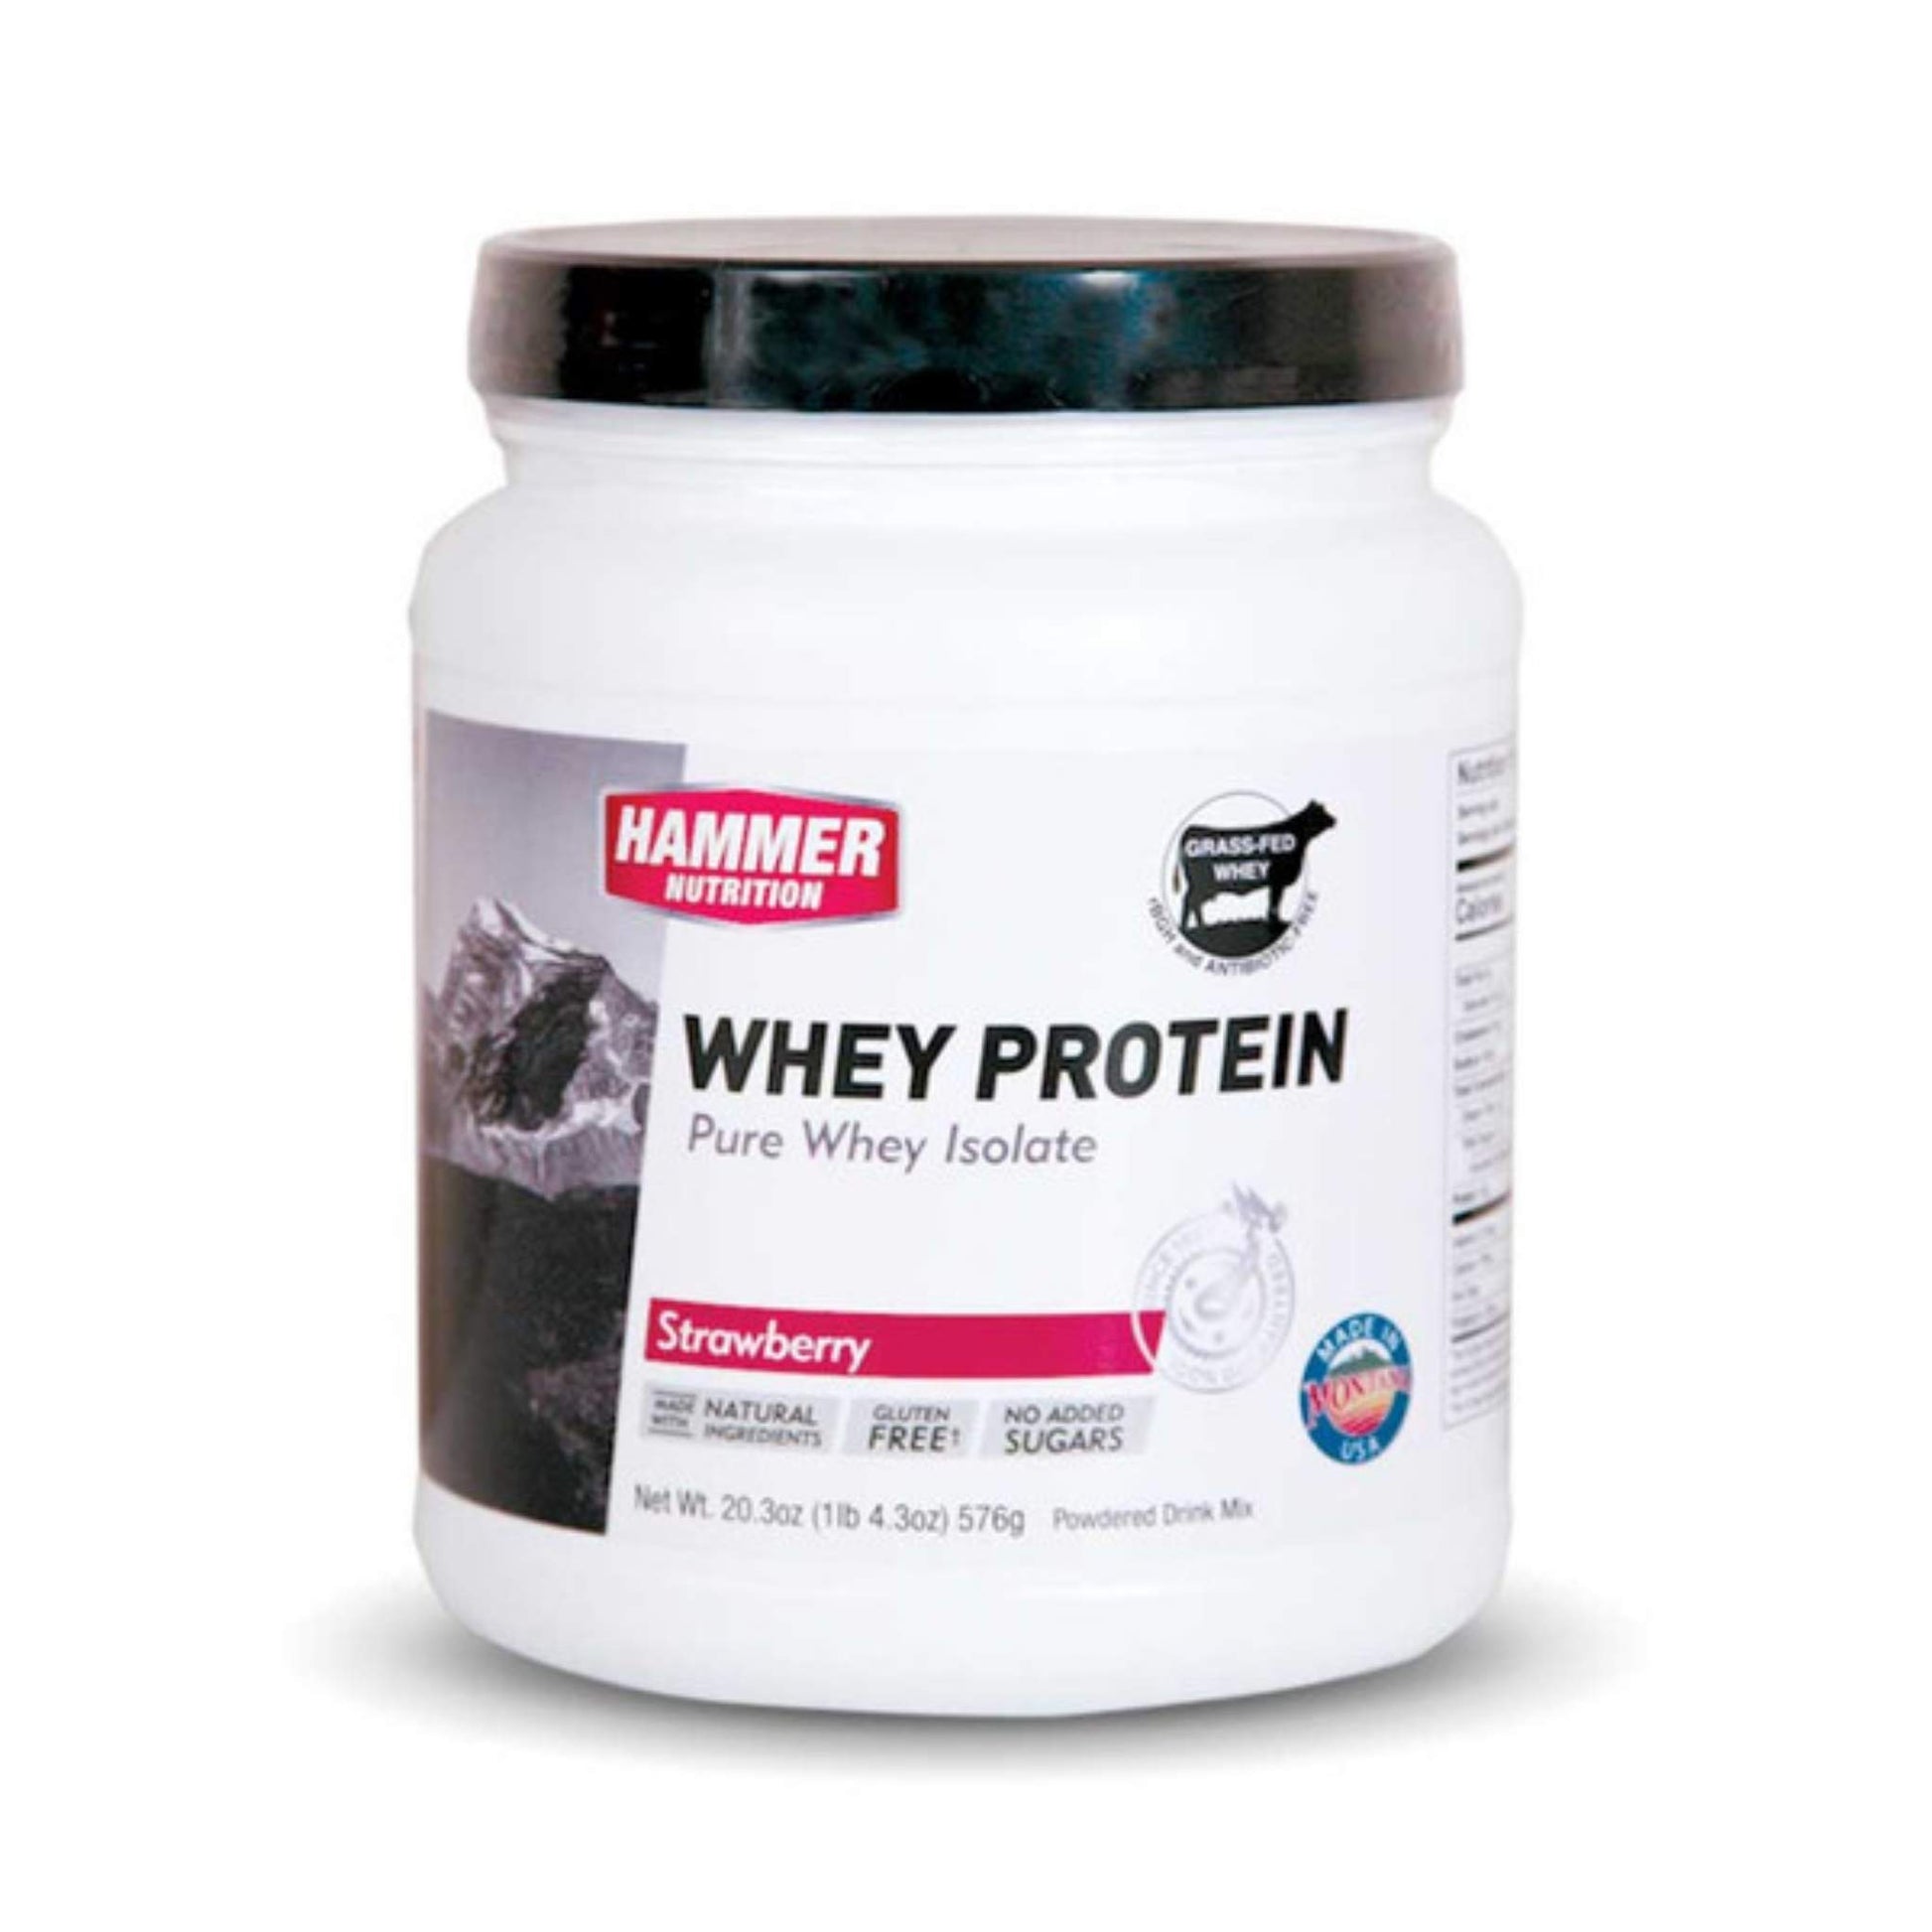 Hammer Nutrition - Whey Protein, Strawberry, 24 Servings, Team Perfect